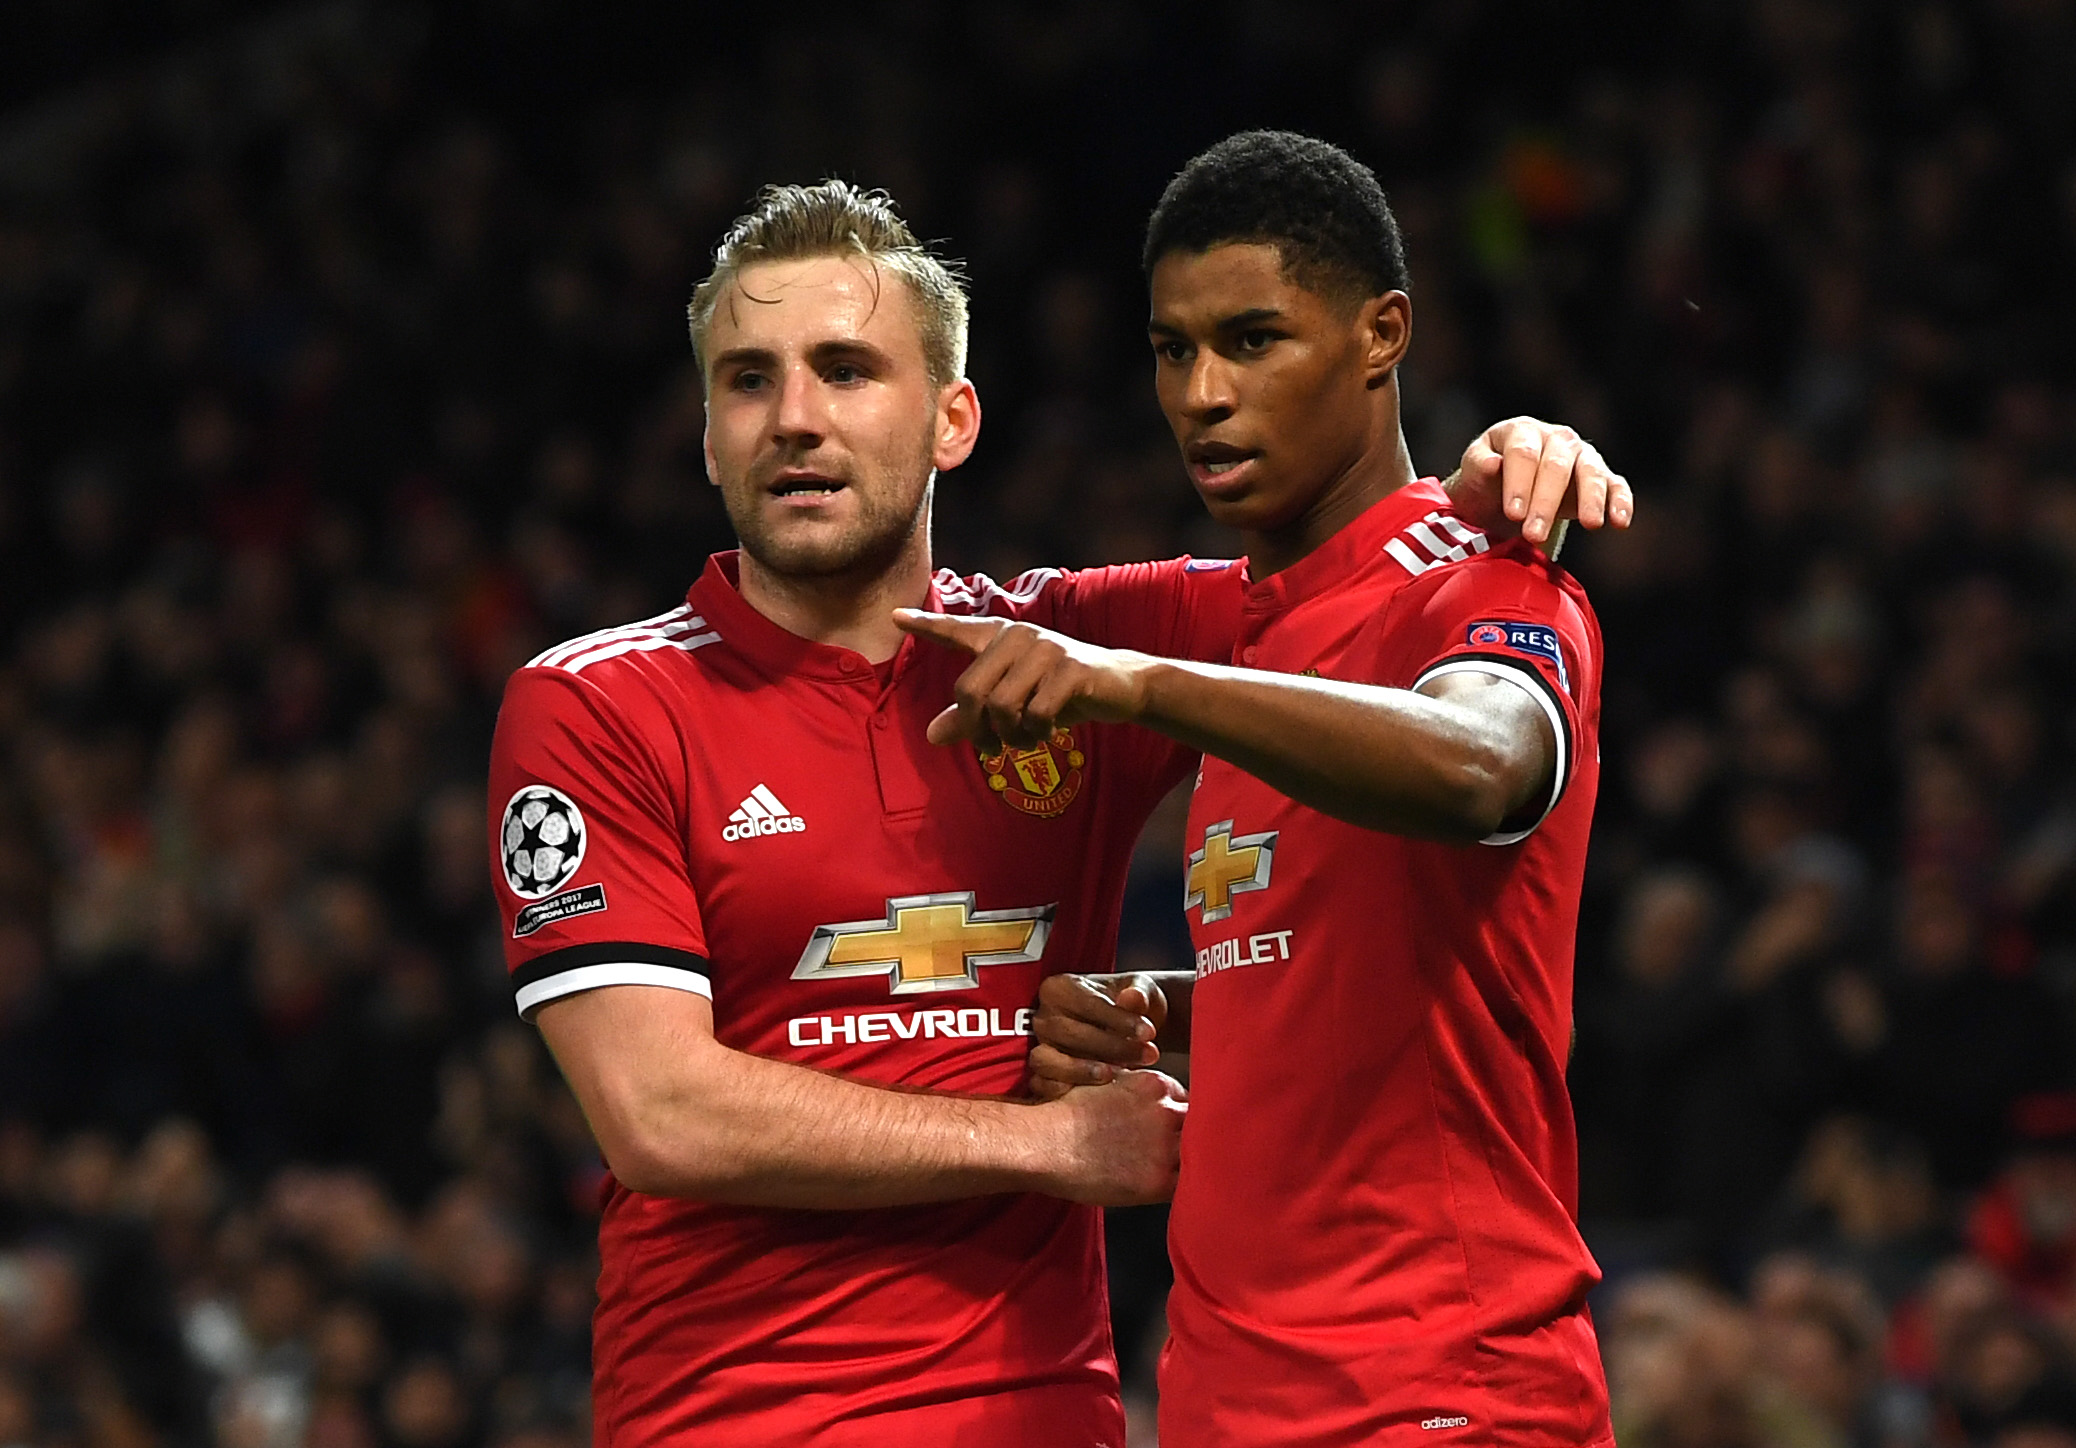 MANCHESTER, ENGLAND - DECEMBER 05:  Marcus Rashford of Manchester United celebrates after scoring his sides second goal with Luke Shaw of Manchester United during the UEFA Champions League group A match between Manchester United and CSKA Moskva at Old Trafford on December 5, 2017 in Manchester, United Kingdom.  (Photo by Gareth Copley/Getty Images)